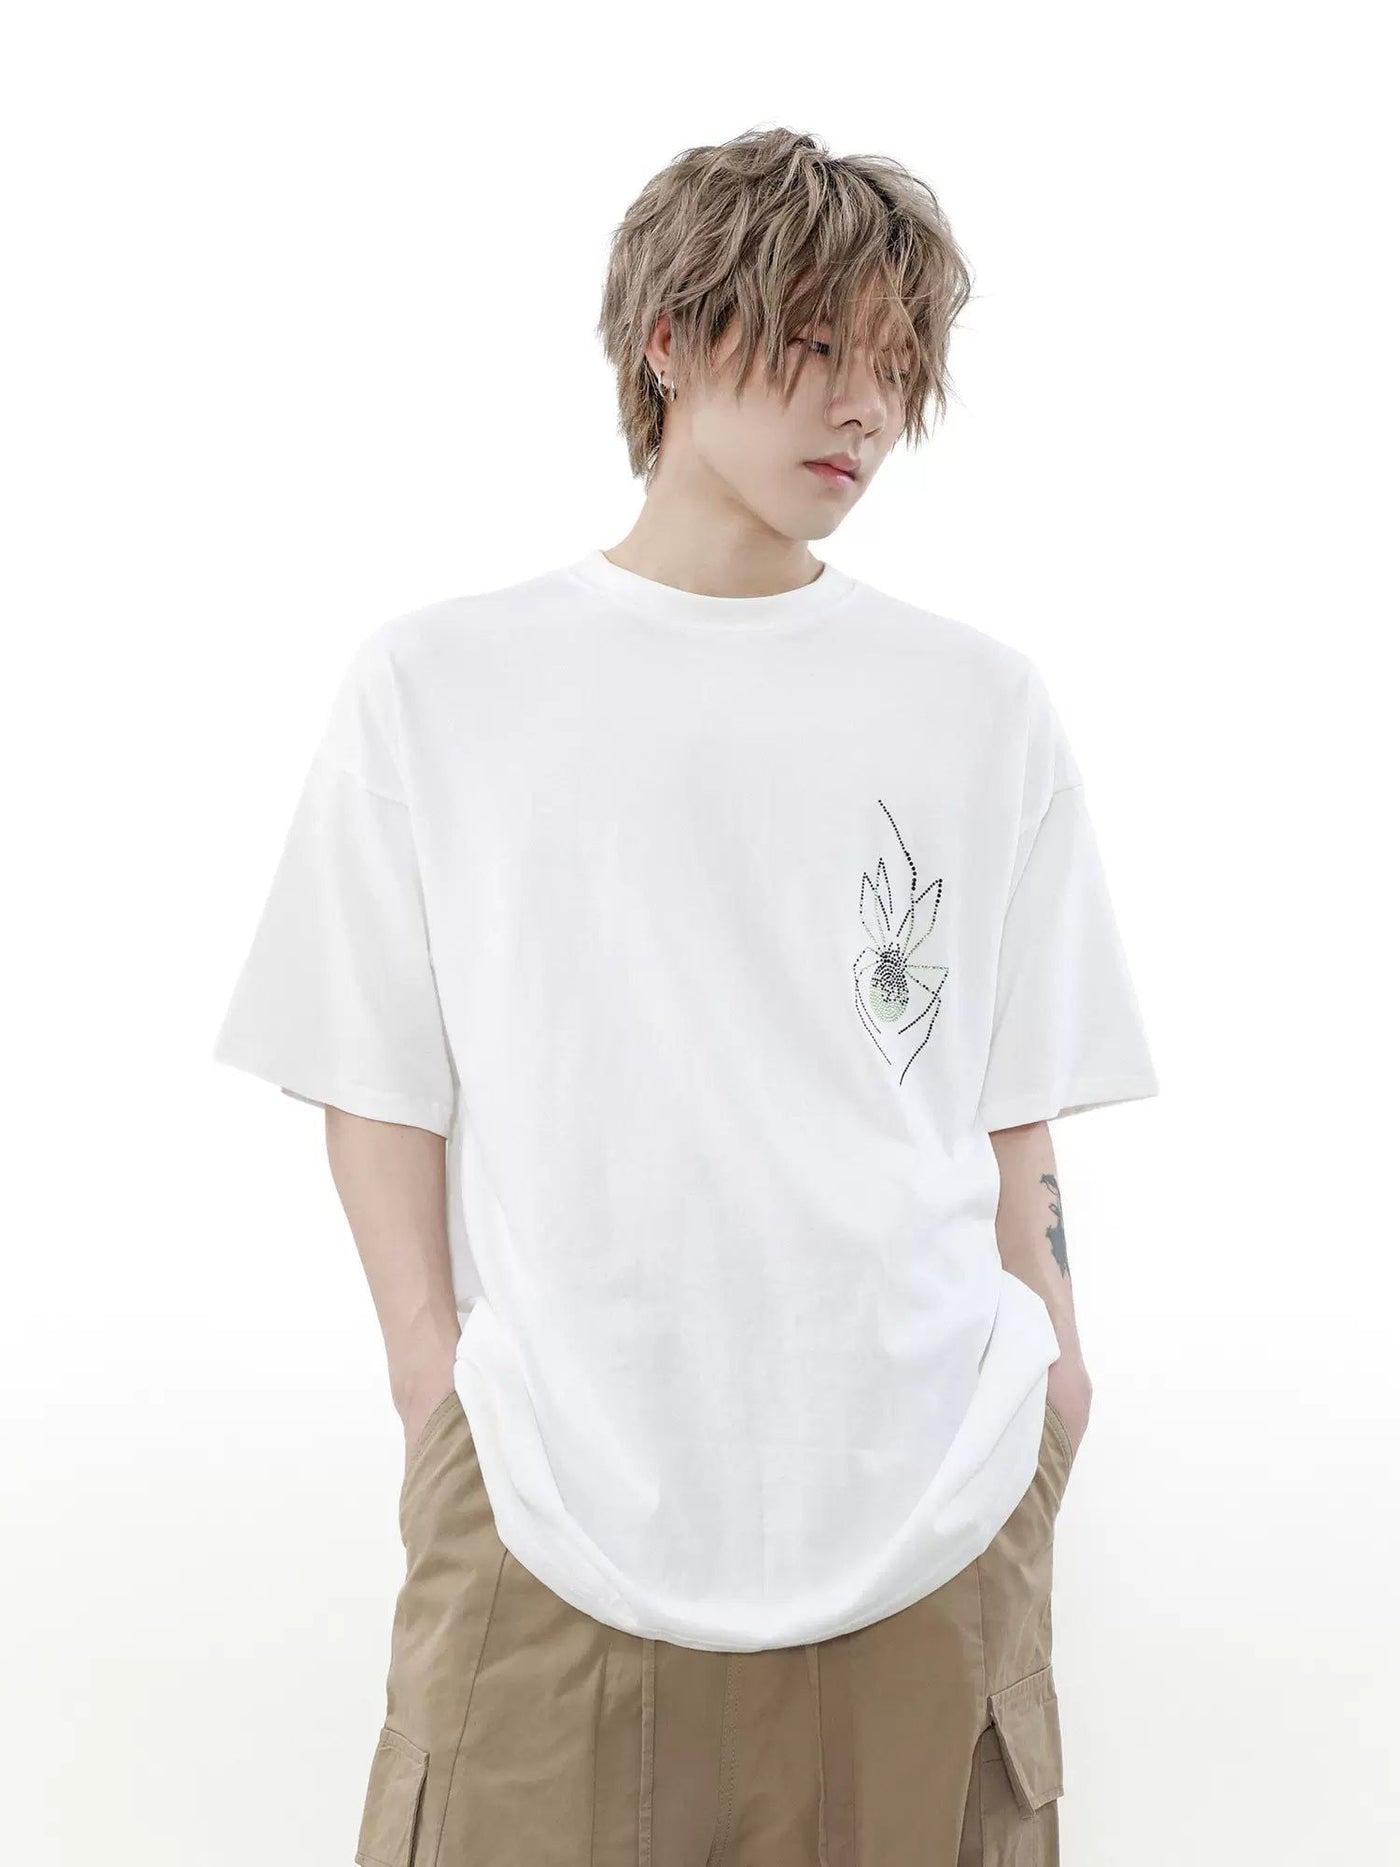 Spider Graphic Casual T-Shirt Korean Street Fashion T-Shirt By Mr Nearly Shop Online at OH Vault